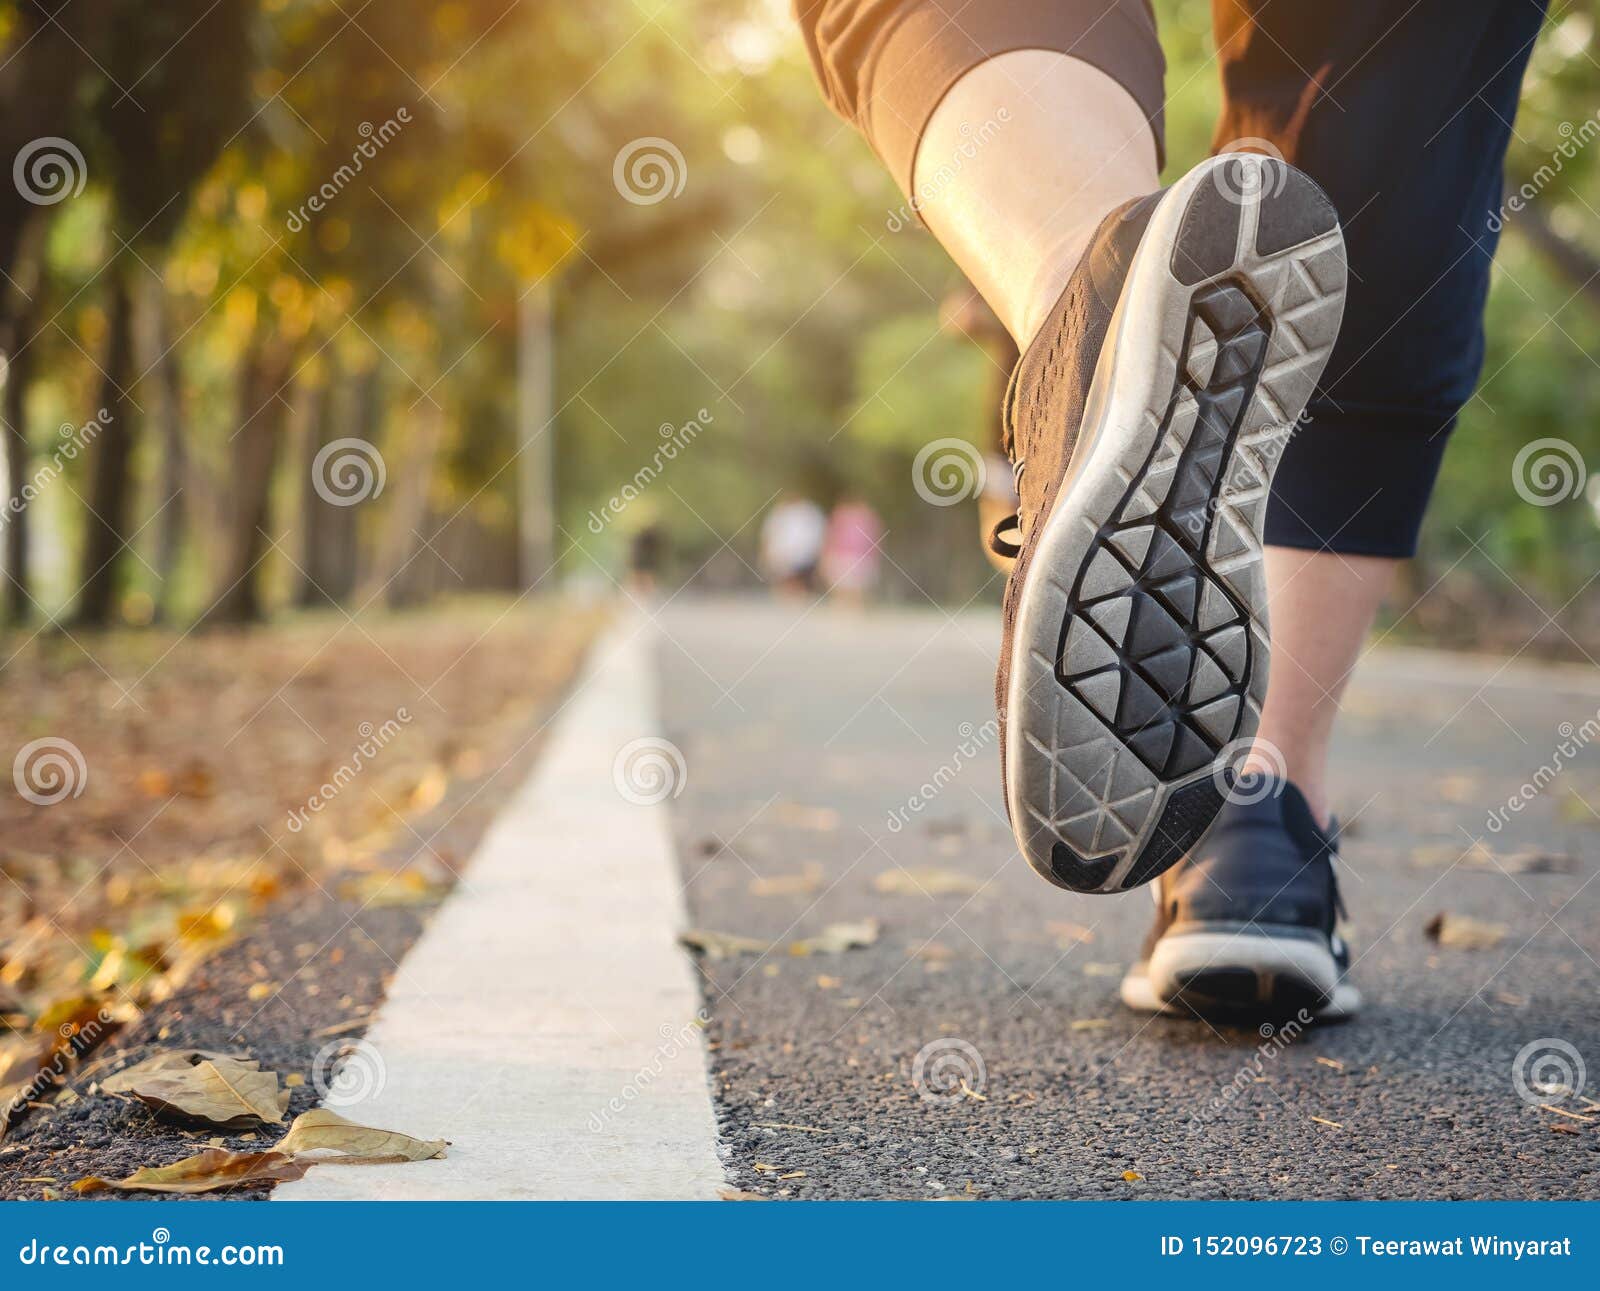 woman walking in park outdoor workout trail exercise healthy lifestyle